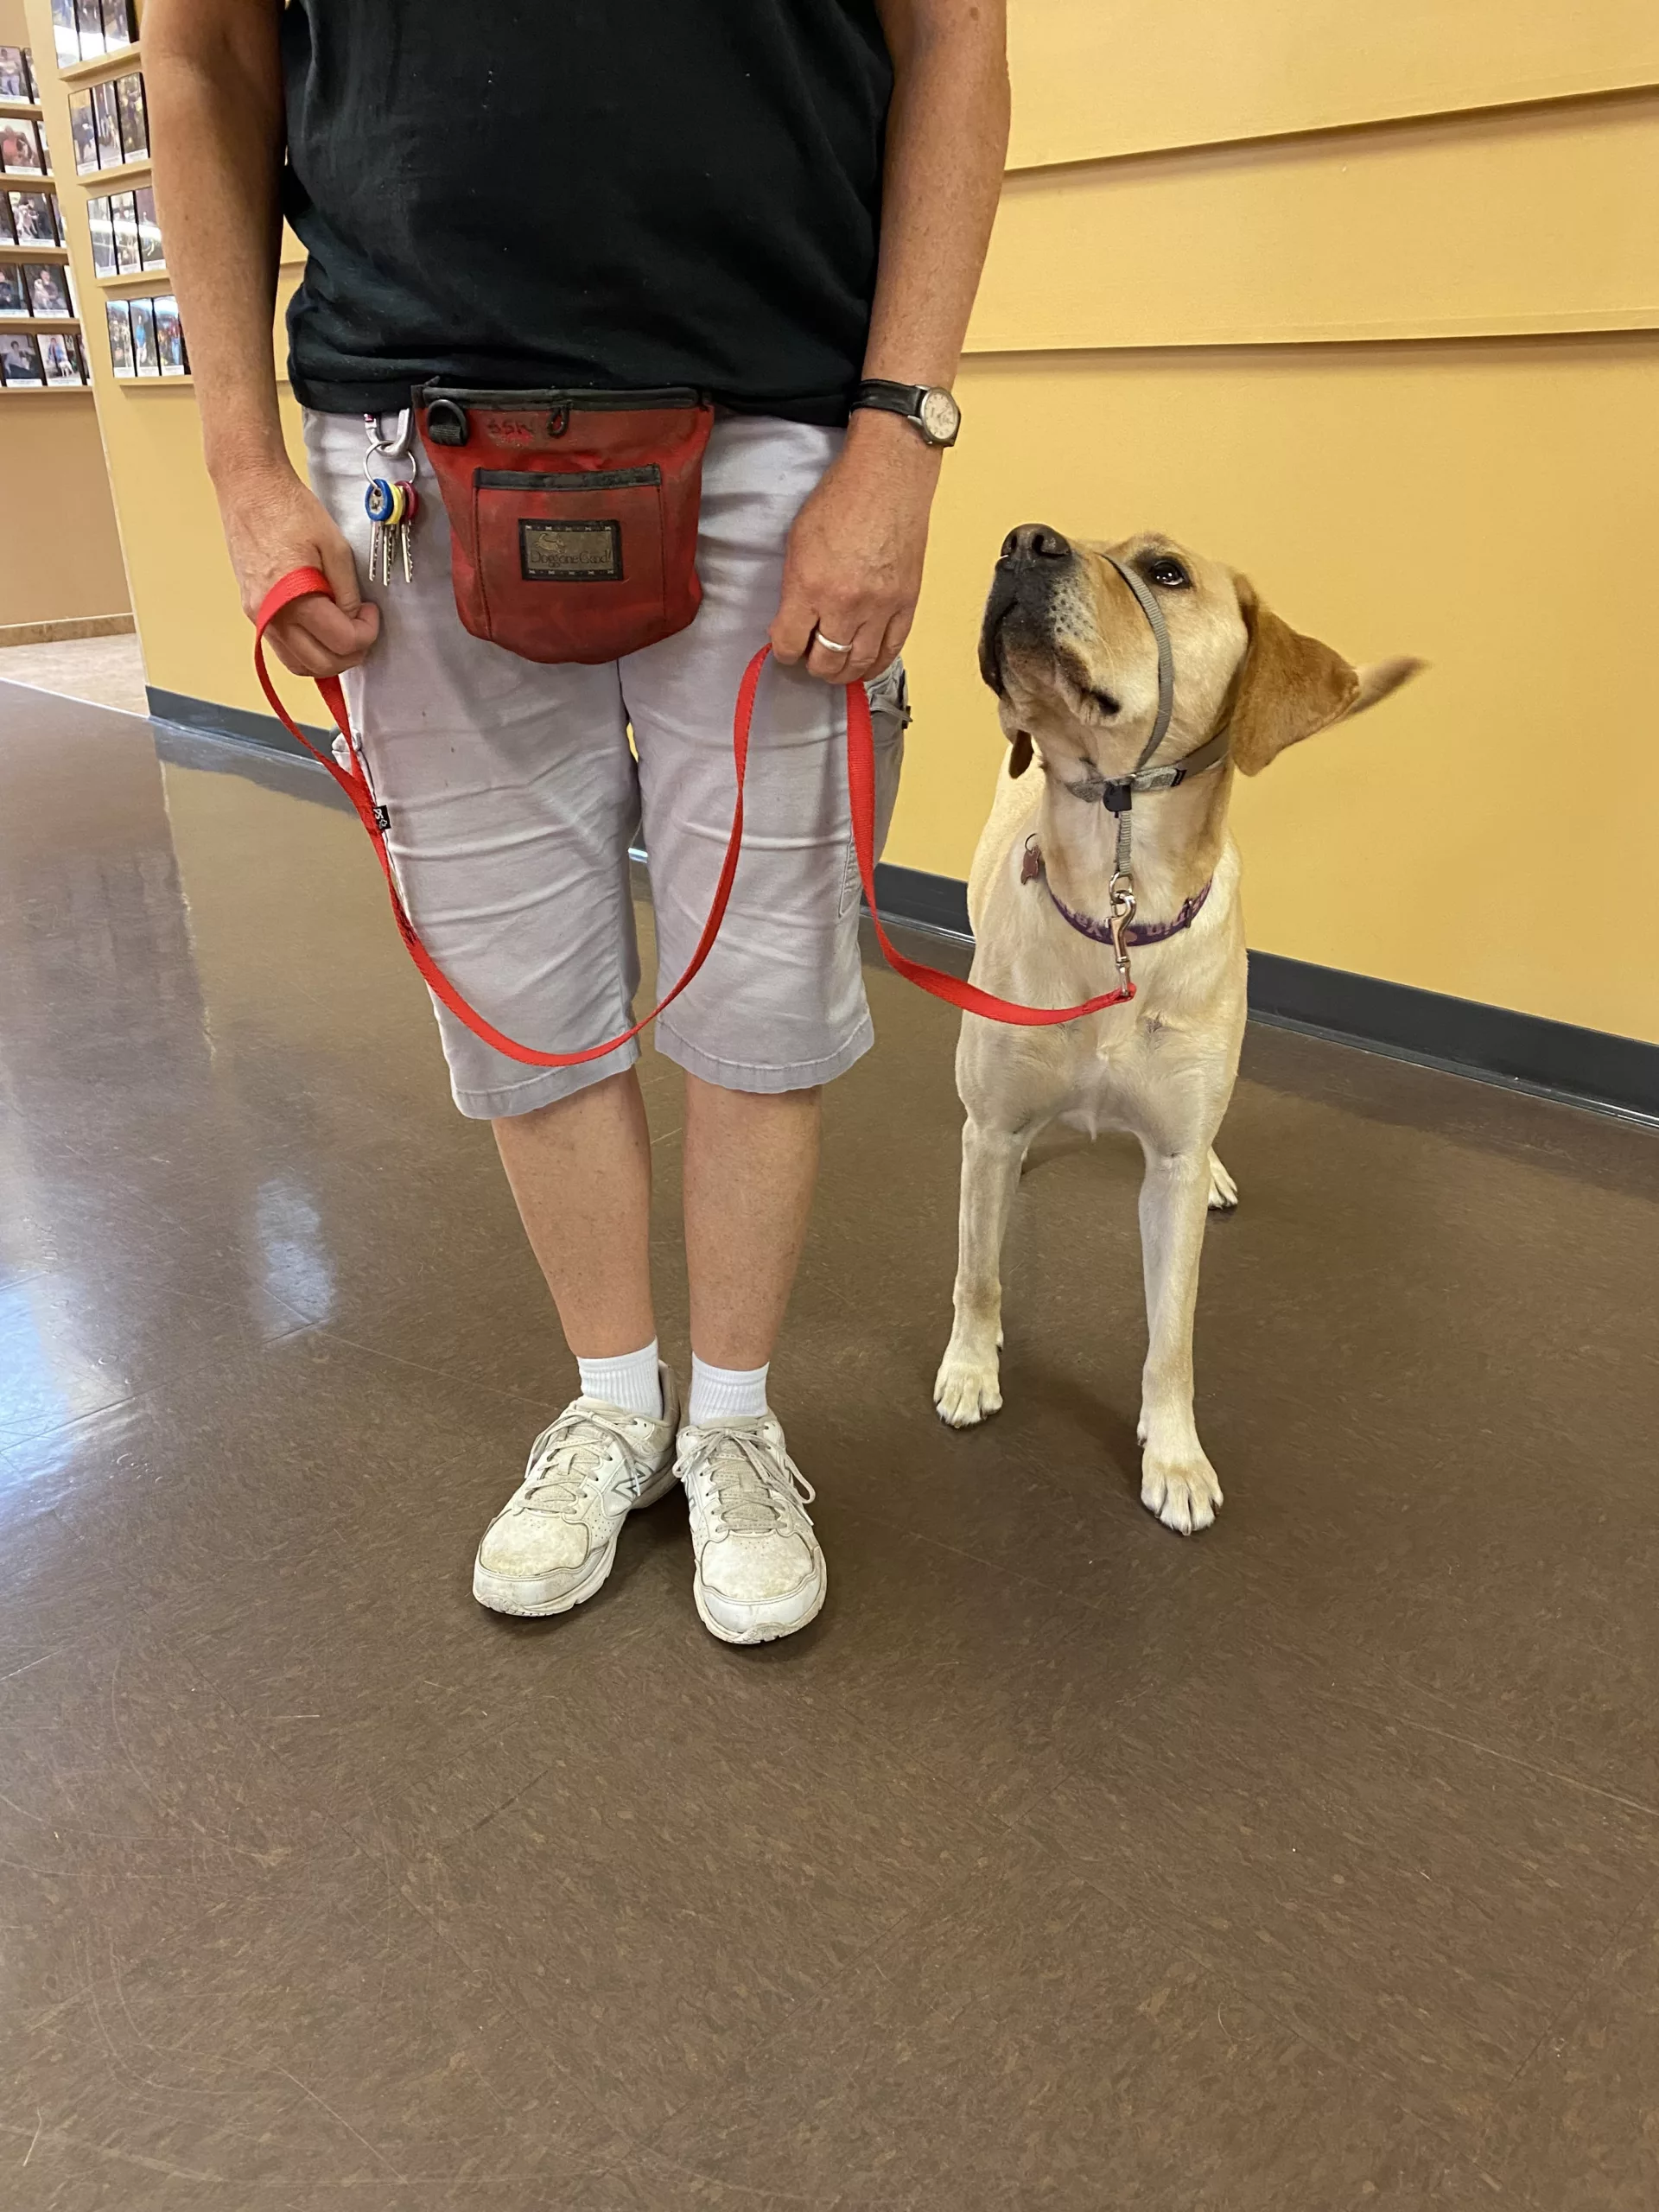 Bottom half of woman indoors, loosely holding leashed yellow Lab dog (with two hands lightly on separate parts of leash), who is looking at her.